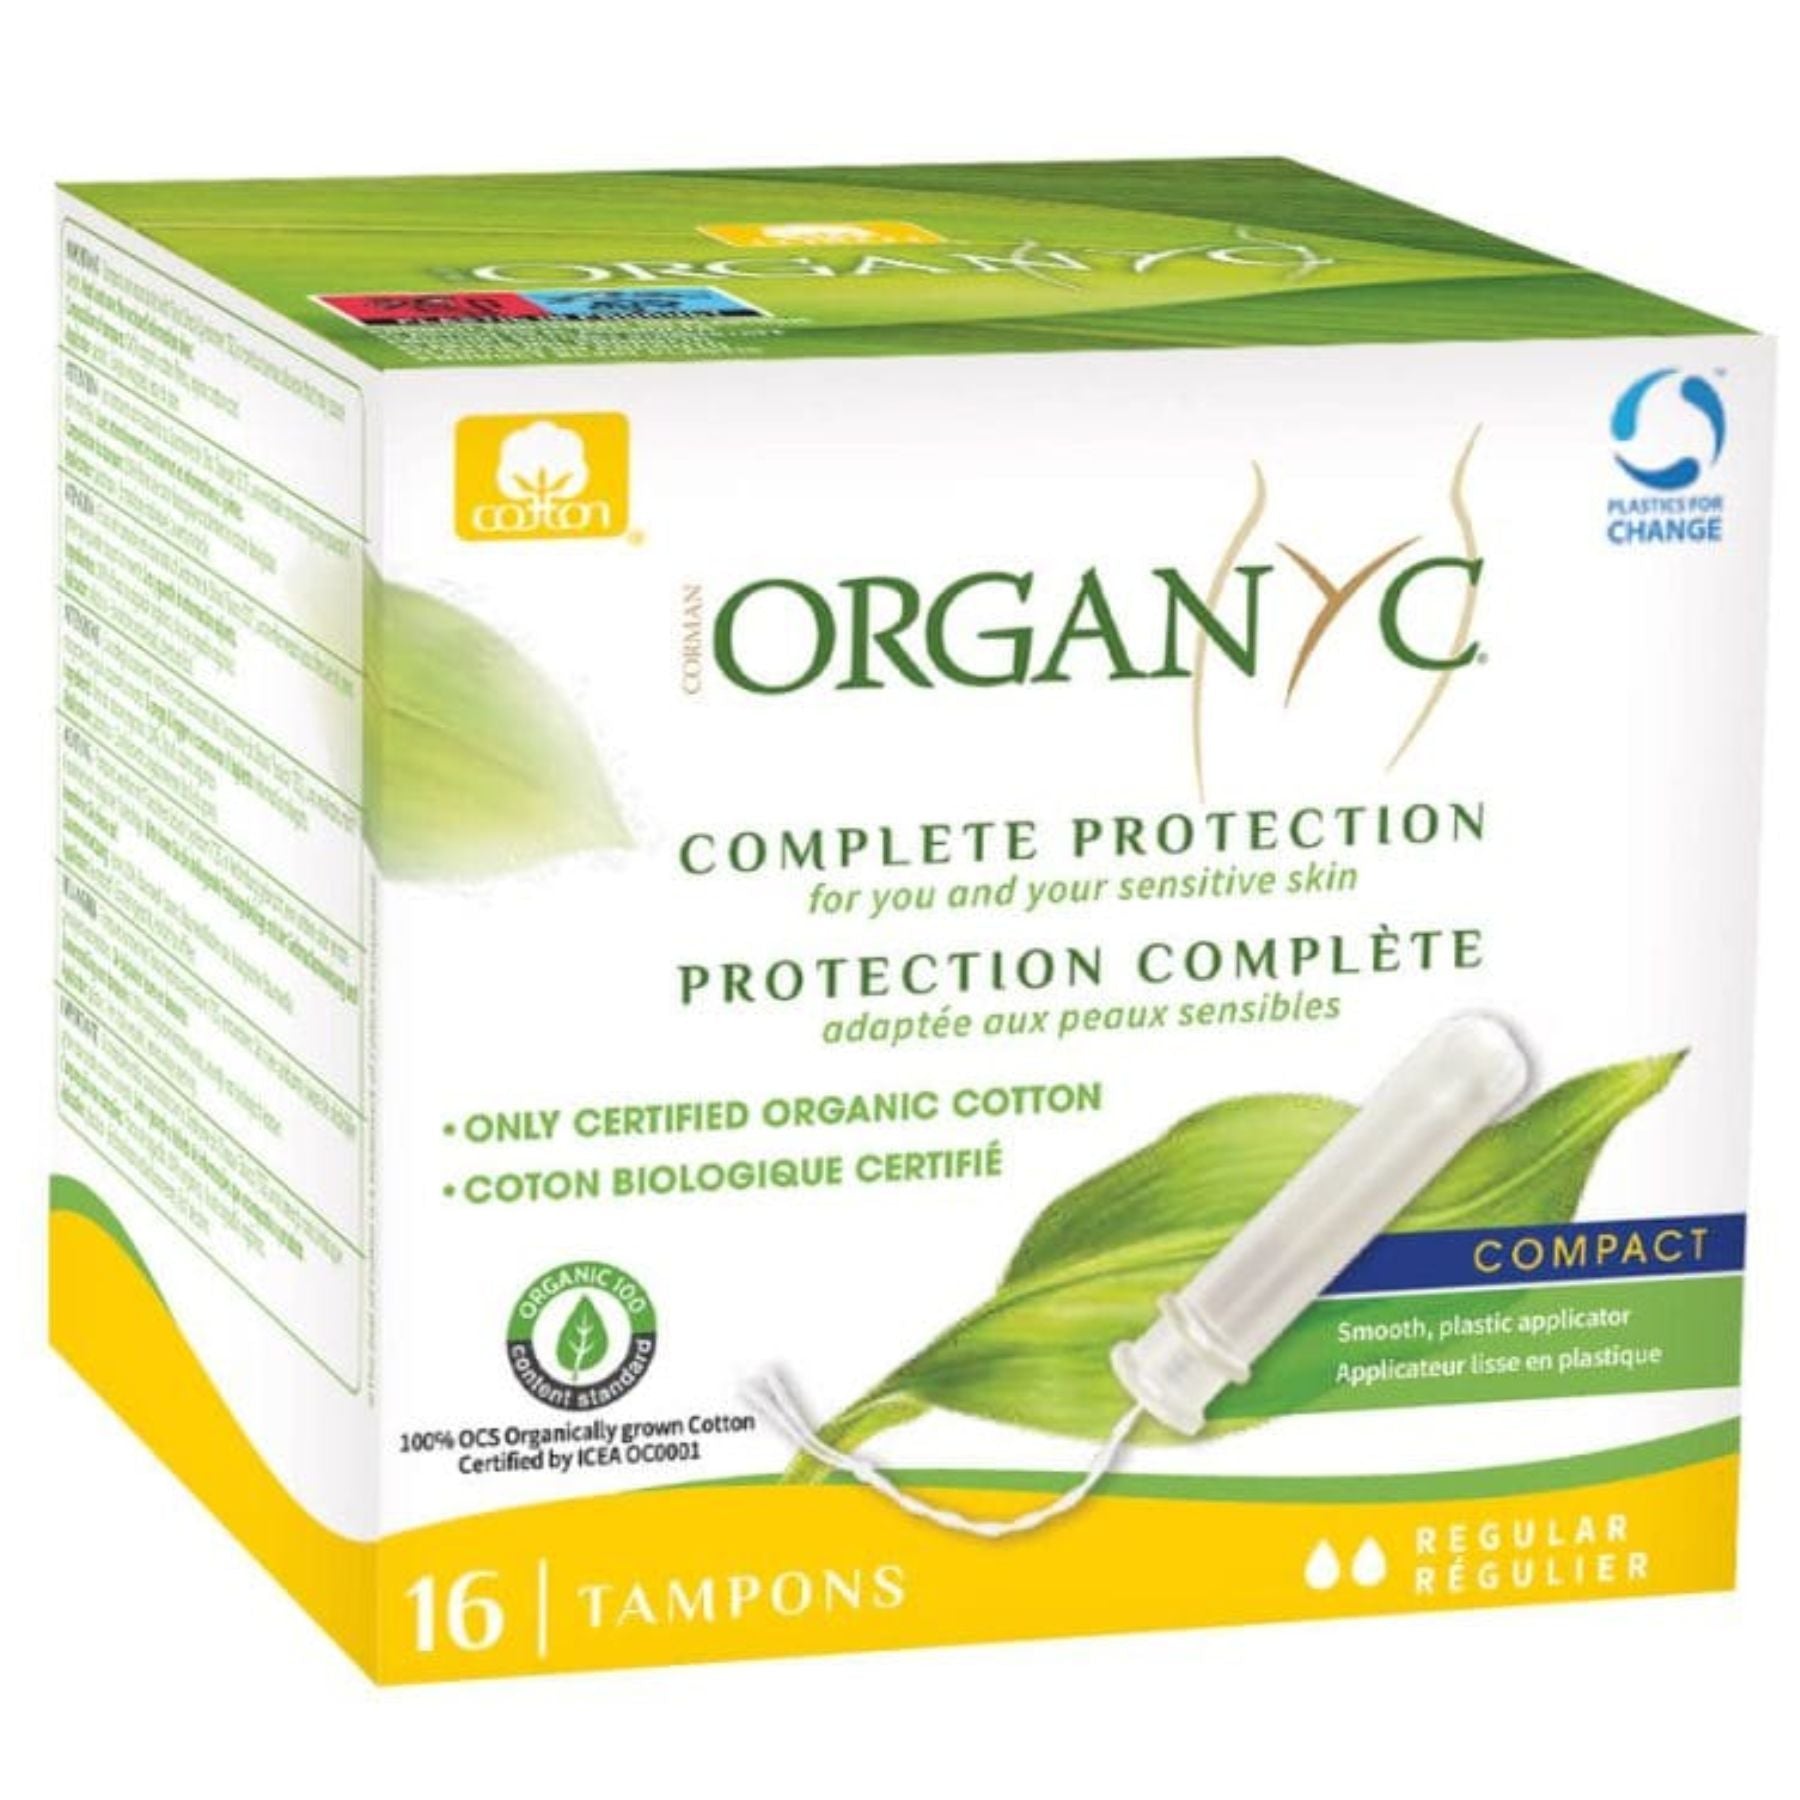 Organyc Compact Regular Tampons with Applicator 16s